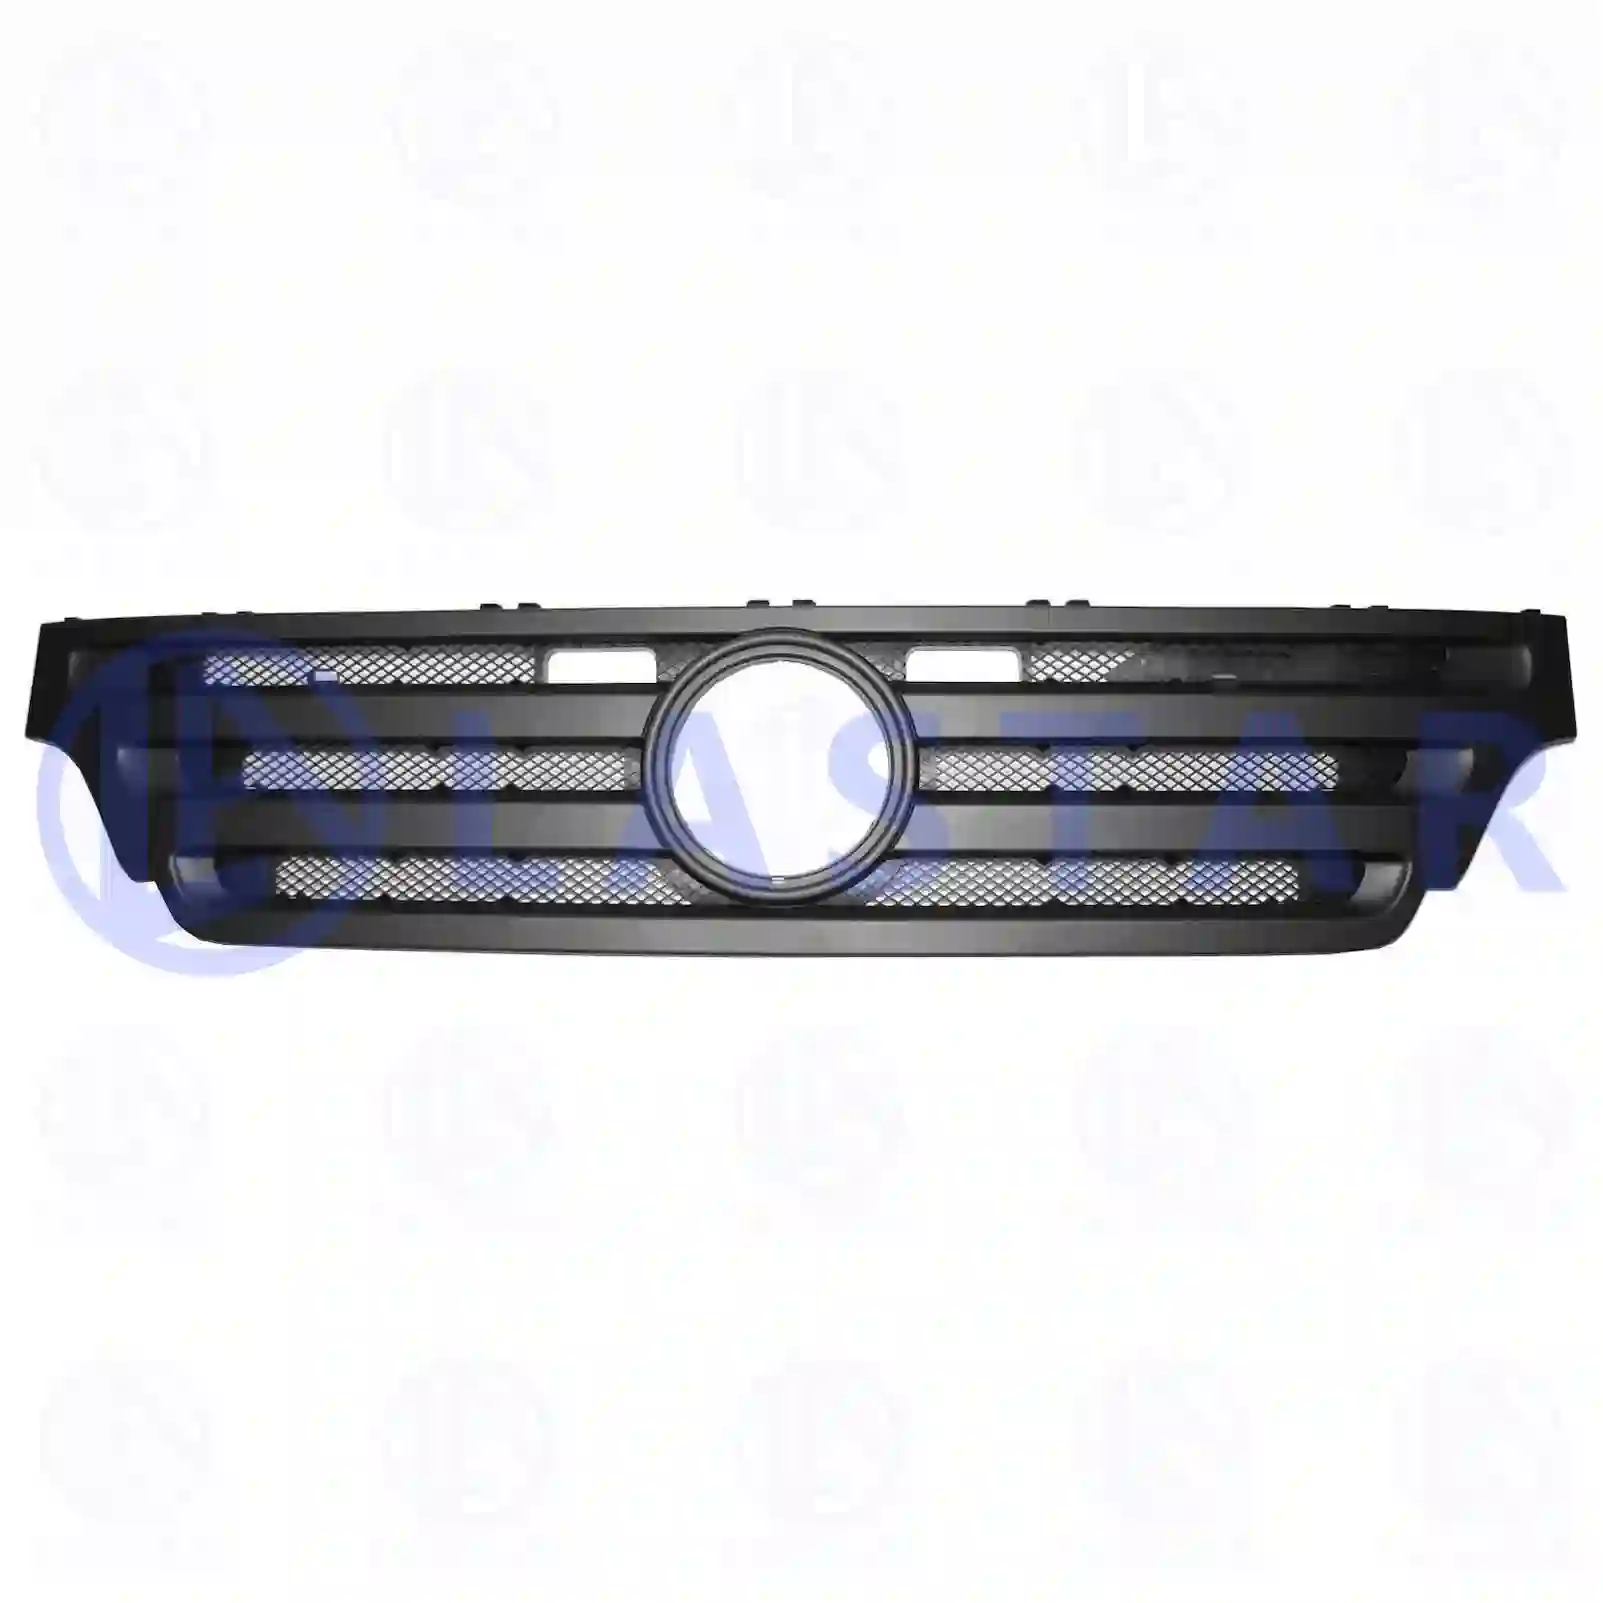 Front grill, 77718060, 9437500218, 94375002189120, 9437500318, 94375003189120 ||  77718060 Lastar Spare Part | Truck Spare Parts, Auotomotive Spare Parts Front grill, 77718060, 9437500218, 94375002189120, 9437500318, 94375003189120 ||  77718060 Lastar Spare Part | Truck Spare Parts, Auotomotive Spare Parts